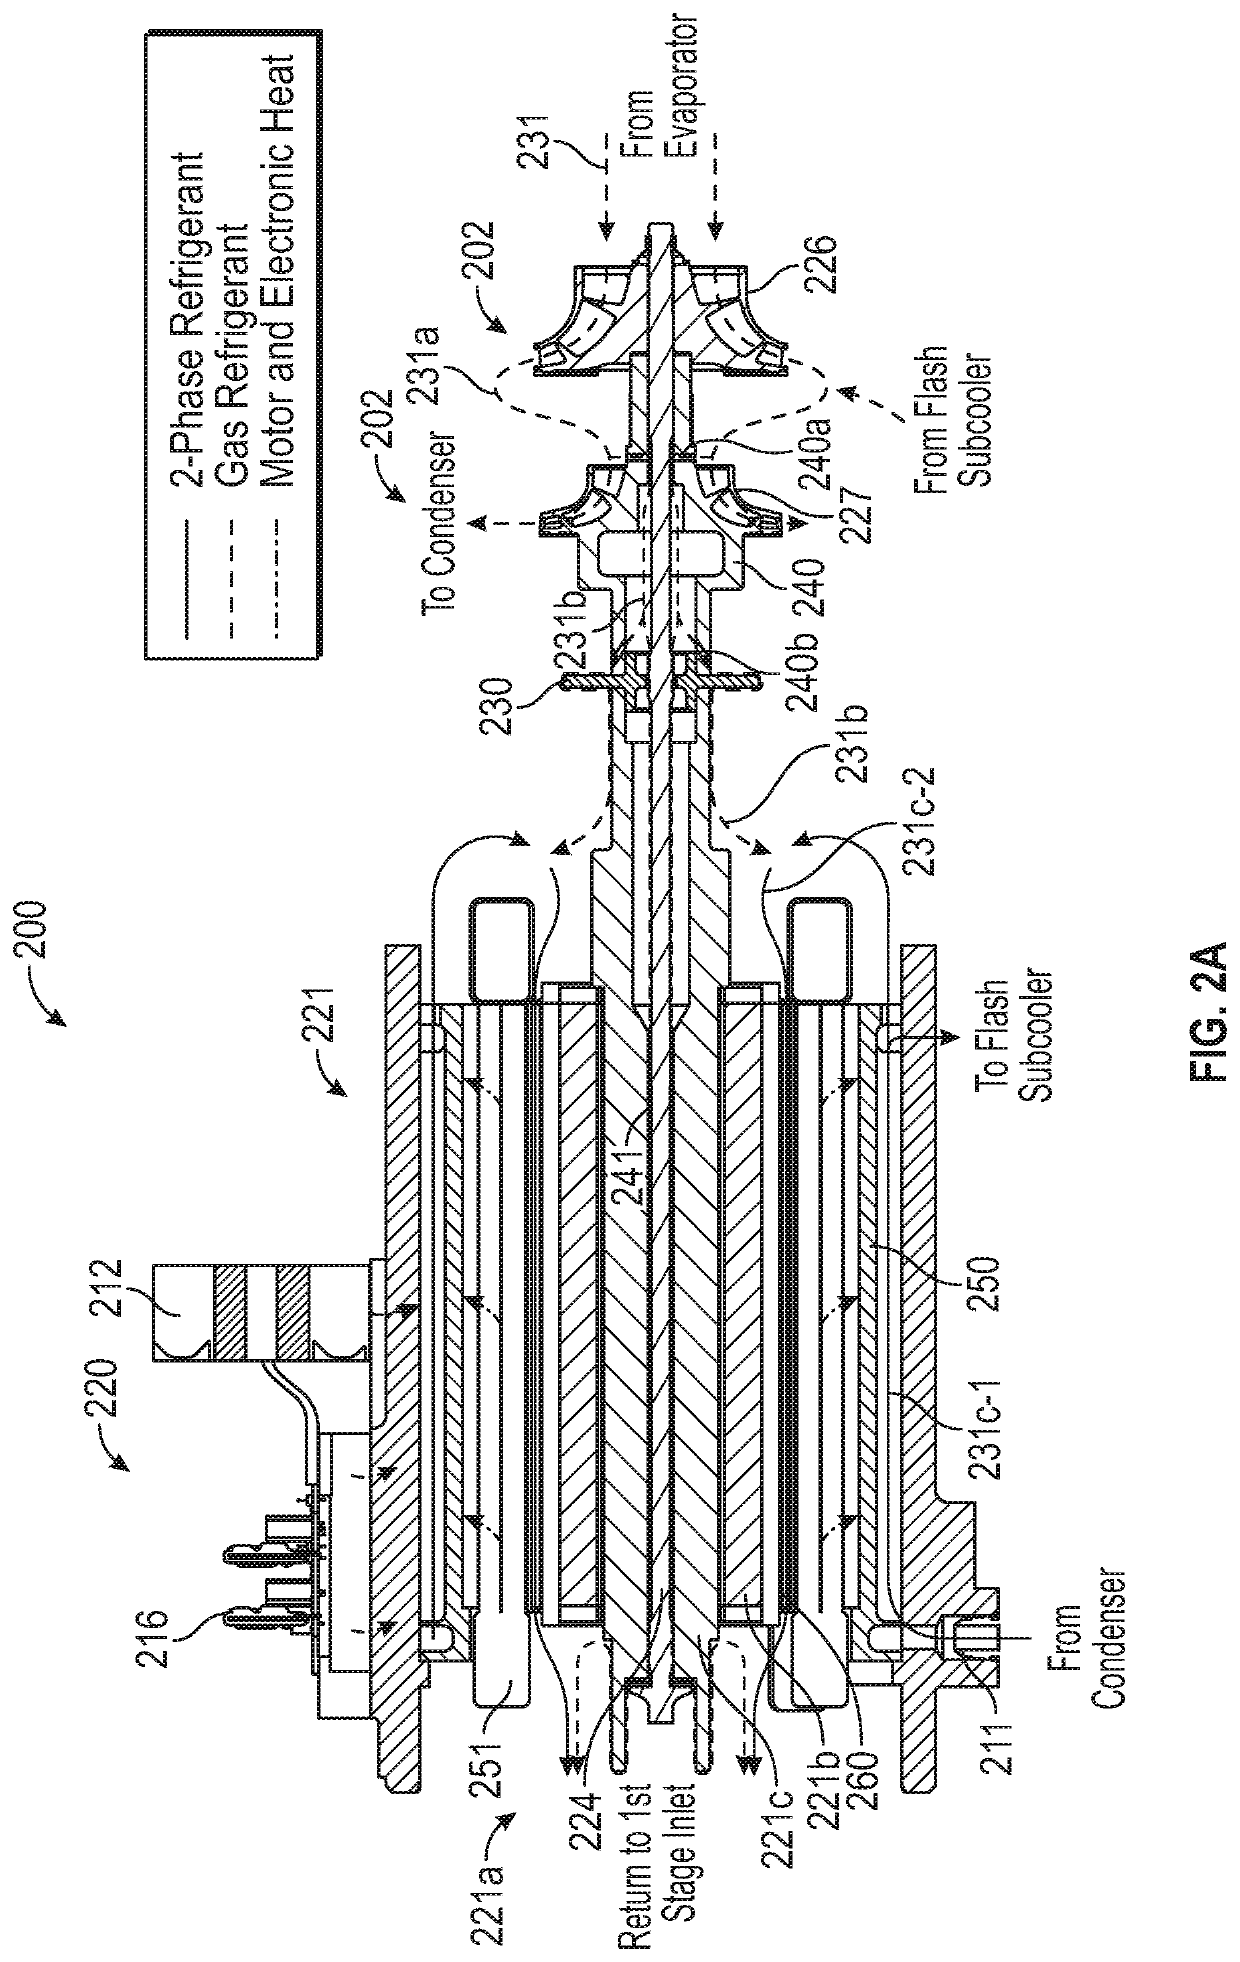 Multistage compressor having interstage refrigerant path split between first portion flowing to end of shaft and second portion following around thrust bearing disc